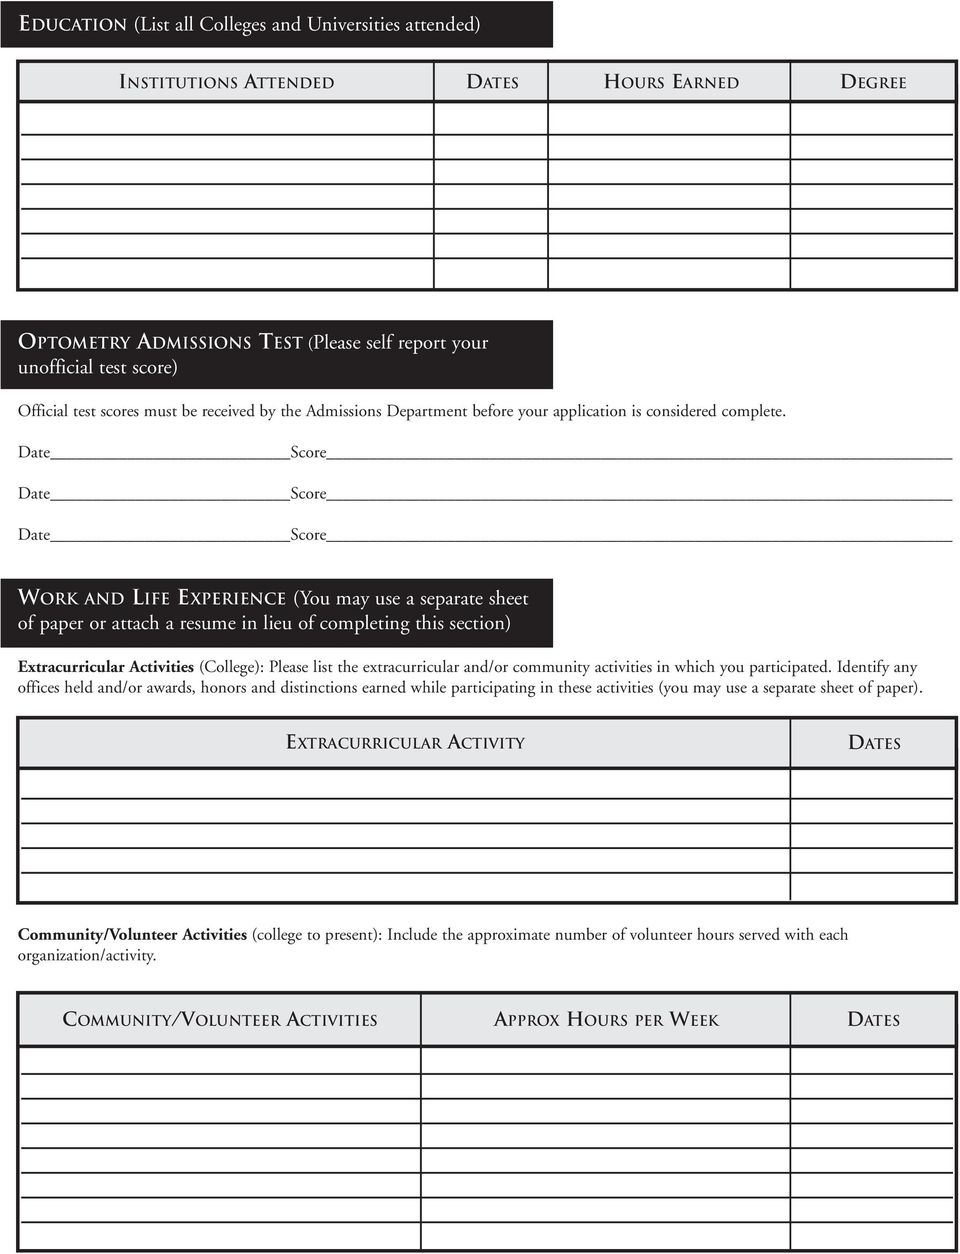 Date Score Date Score Date Score WORK AND LIFE EXPERIENCE (You may use a separate sheet of paper or attach a resume in lieu of completing this section) Extracurricular Activities (College): Please